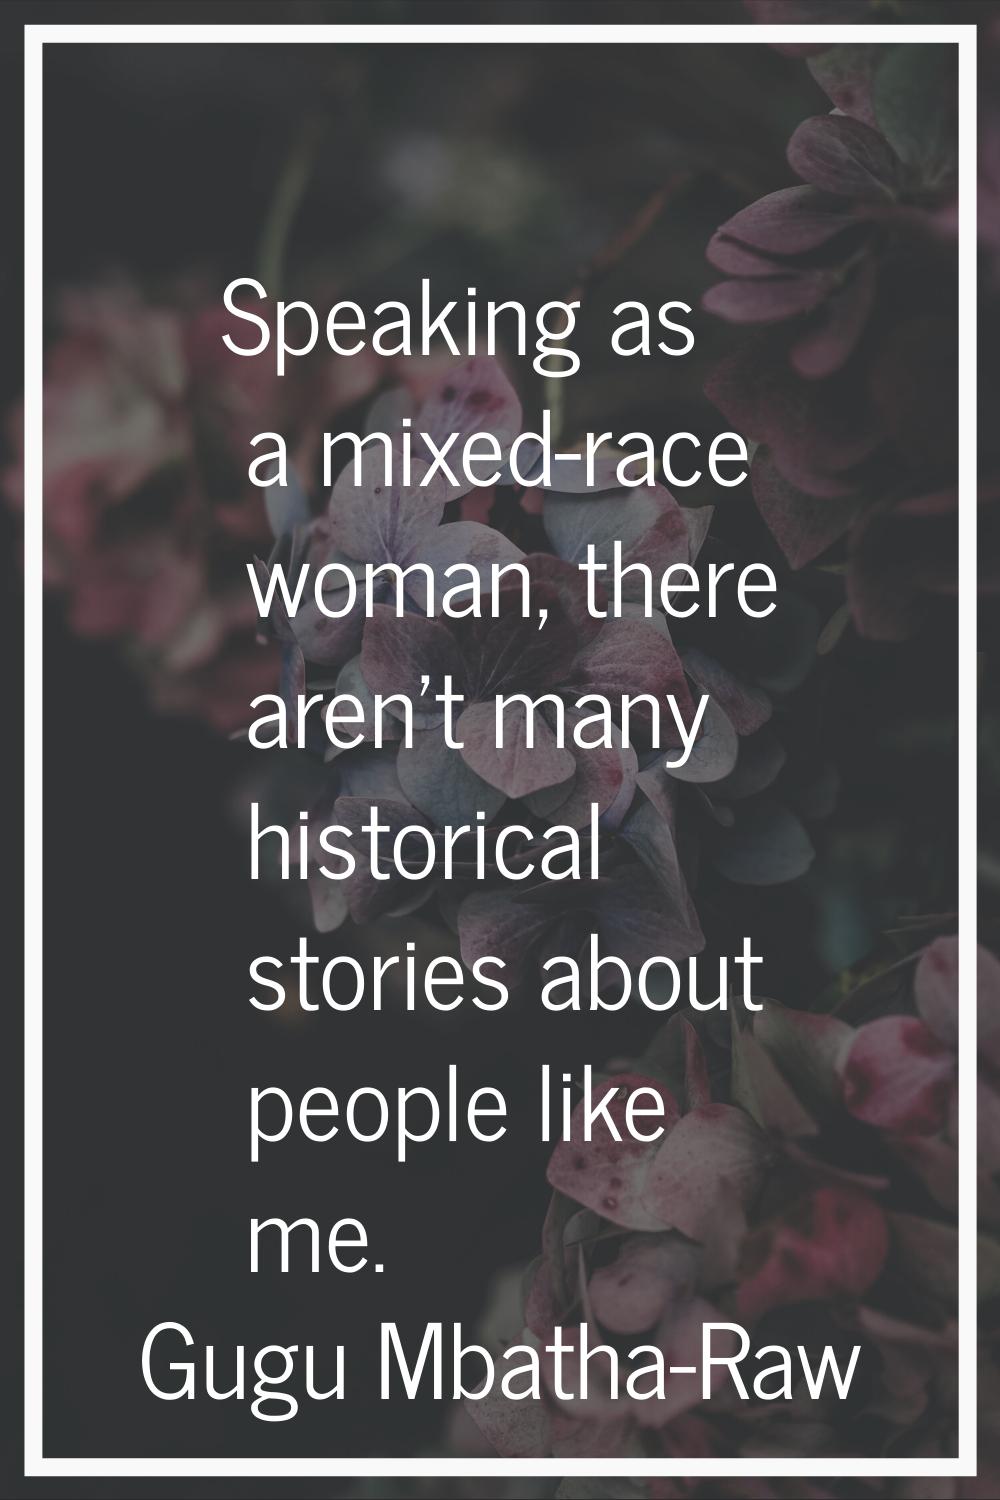 Speaking as a mixed-race woman, there aren't many historical stories about people like me.